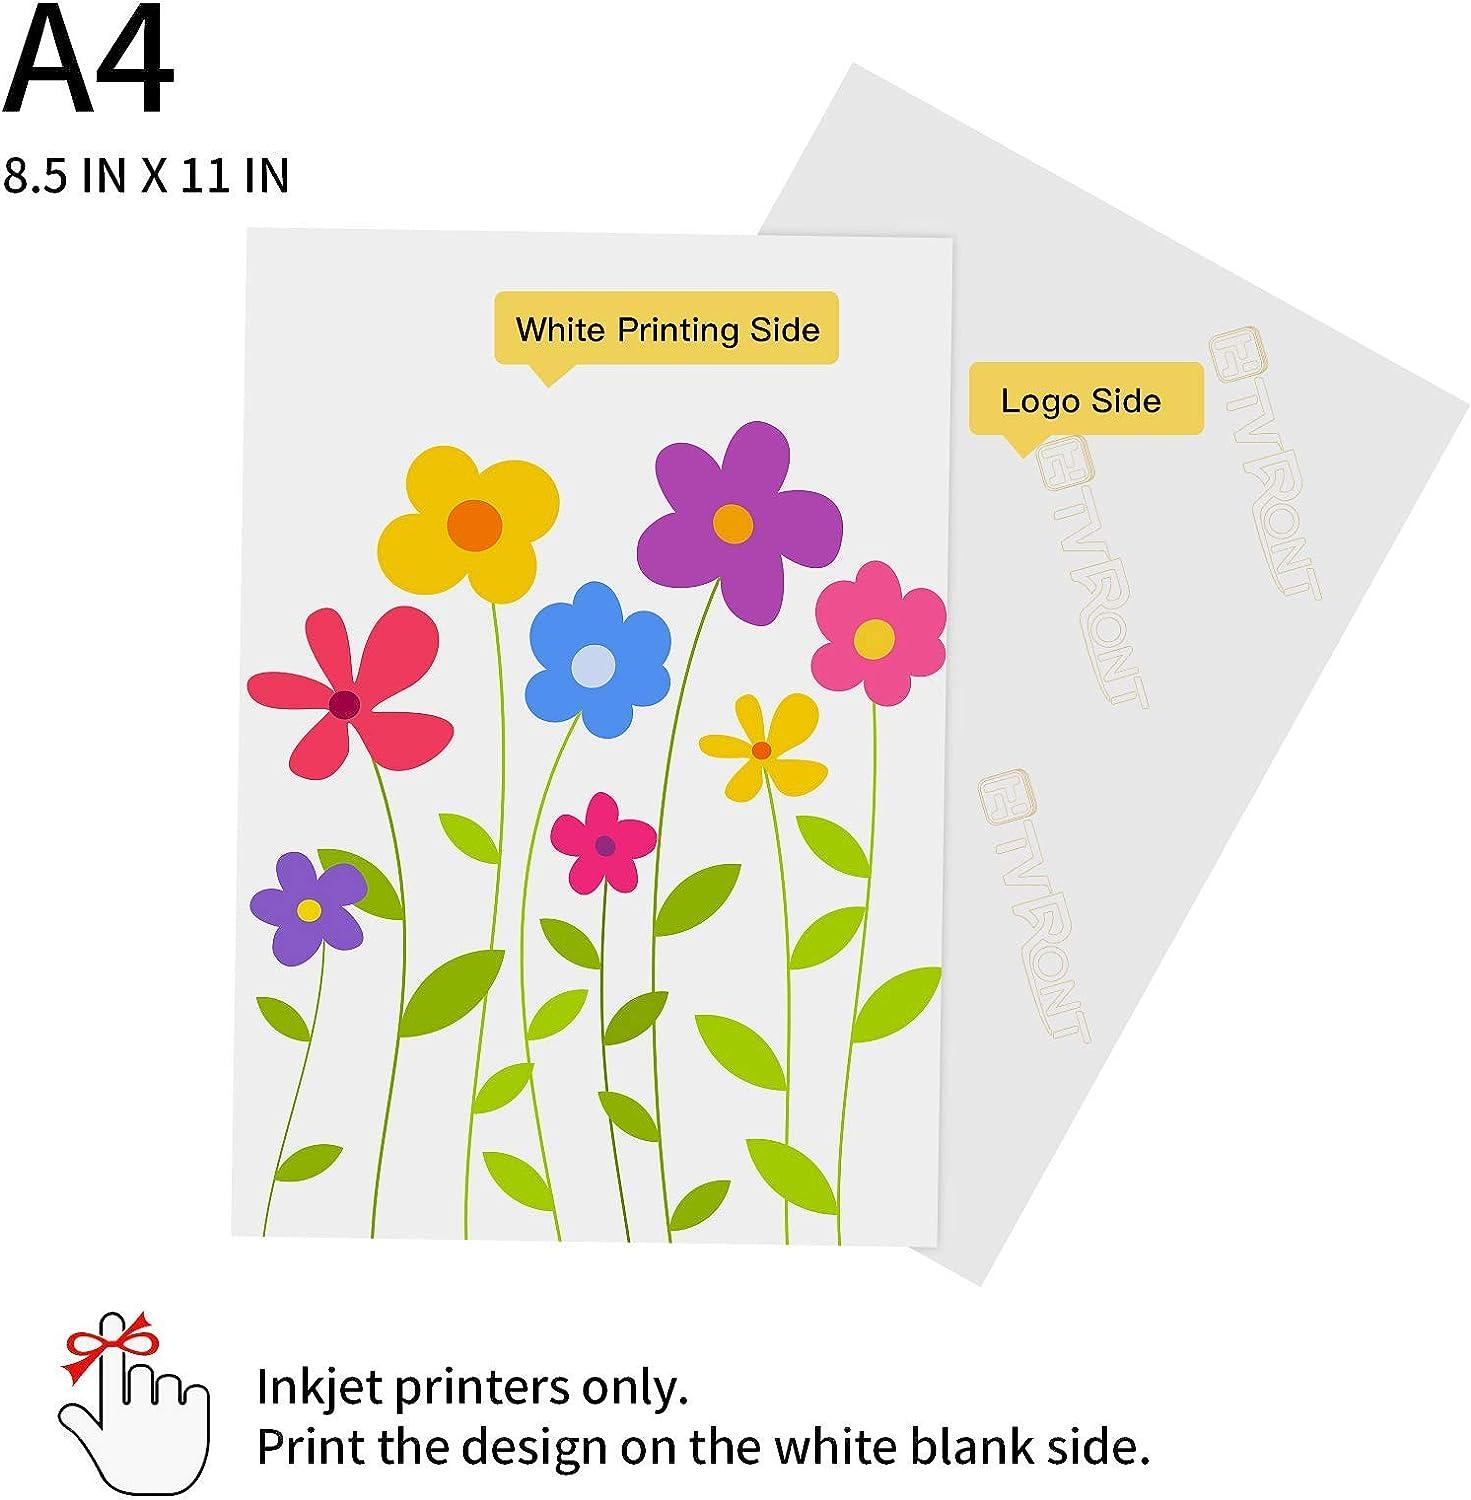 Hello Hobby Print & Transfer Paper Sheets for Dark Colored Cotton Fabric, Use with Ink Jet Printer, Includes 3 - 8.5 inch x 11 inch Sheets